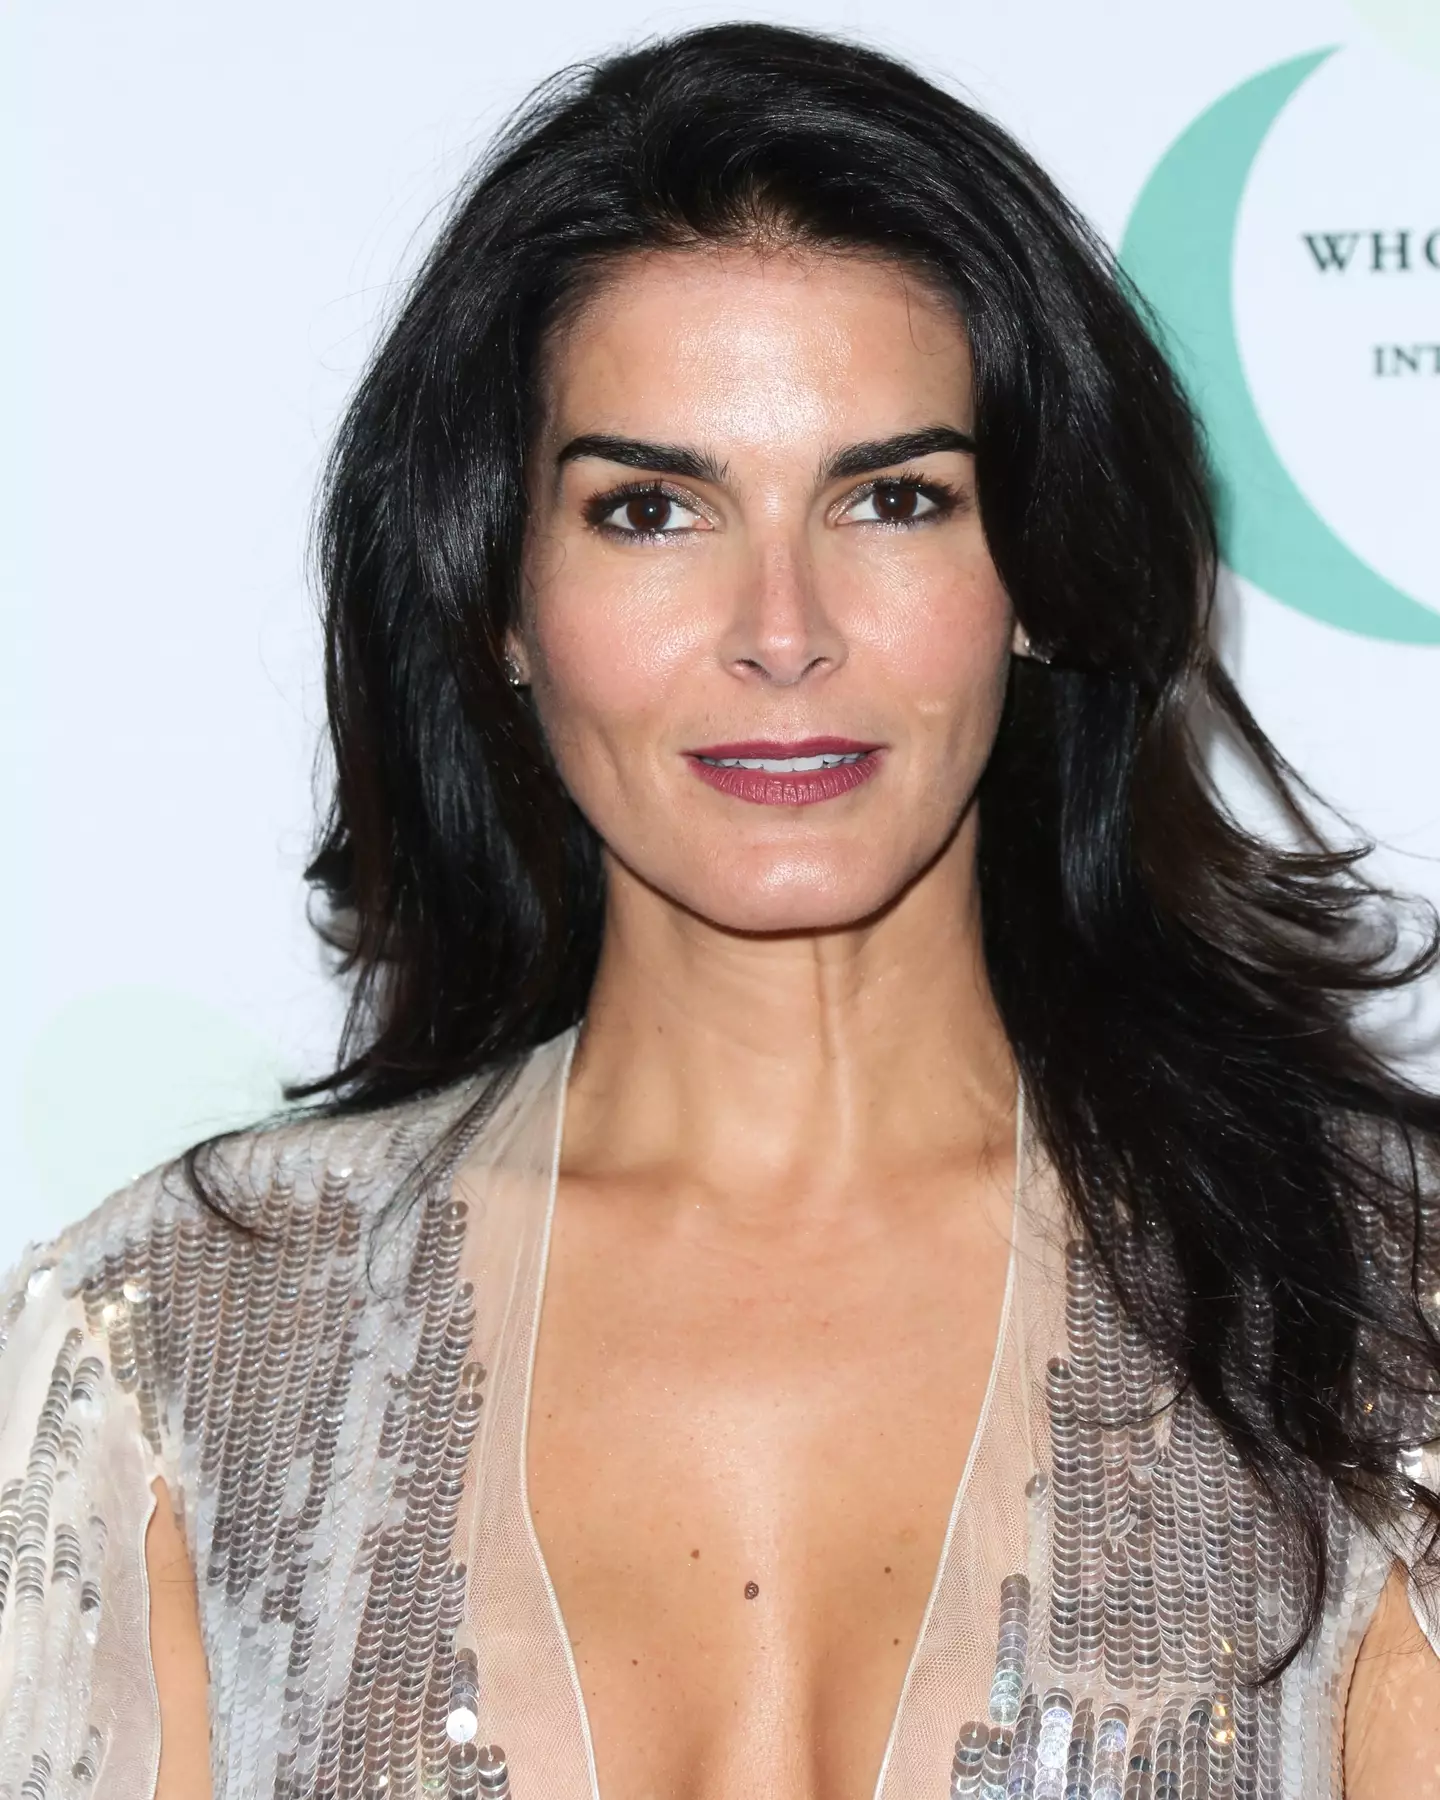 Angie Harmon opened up about the horrifying ordeal on Instagram.